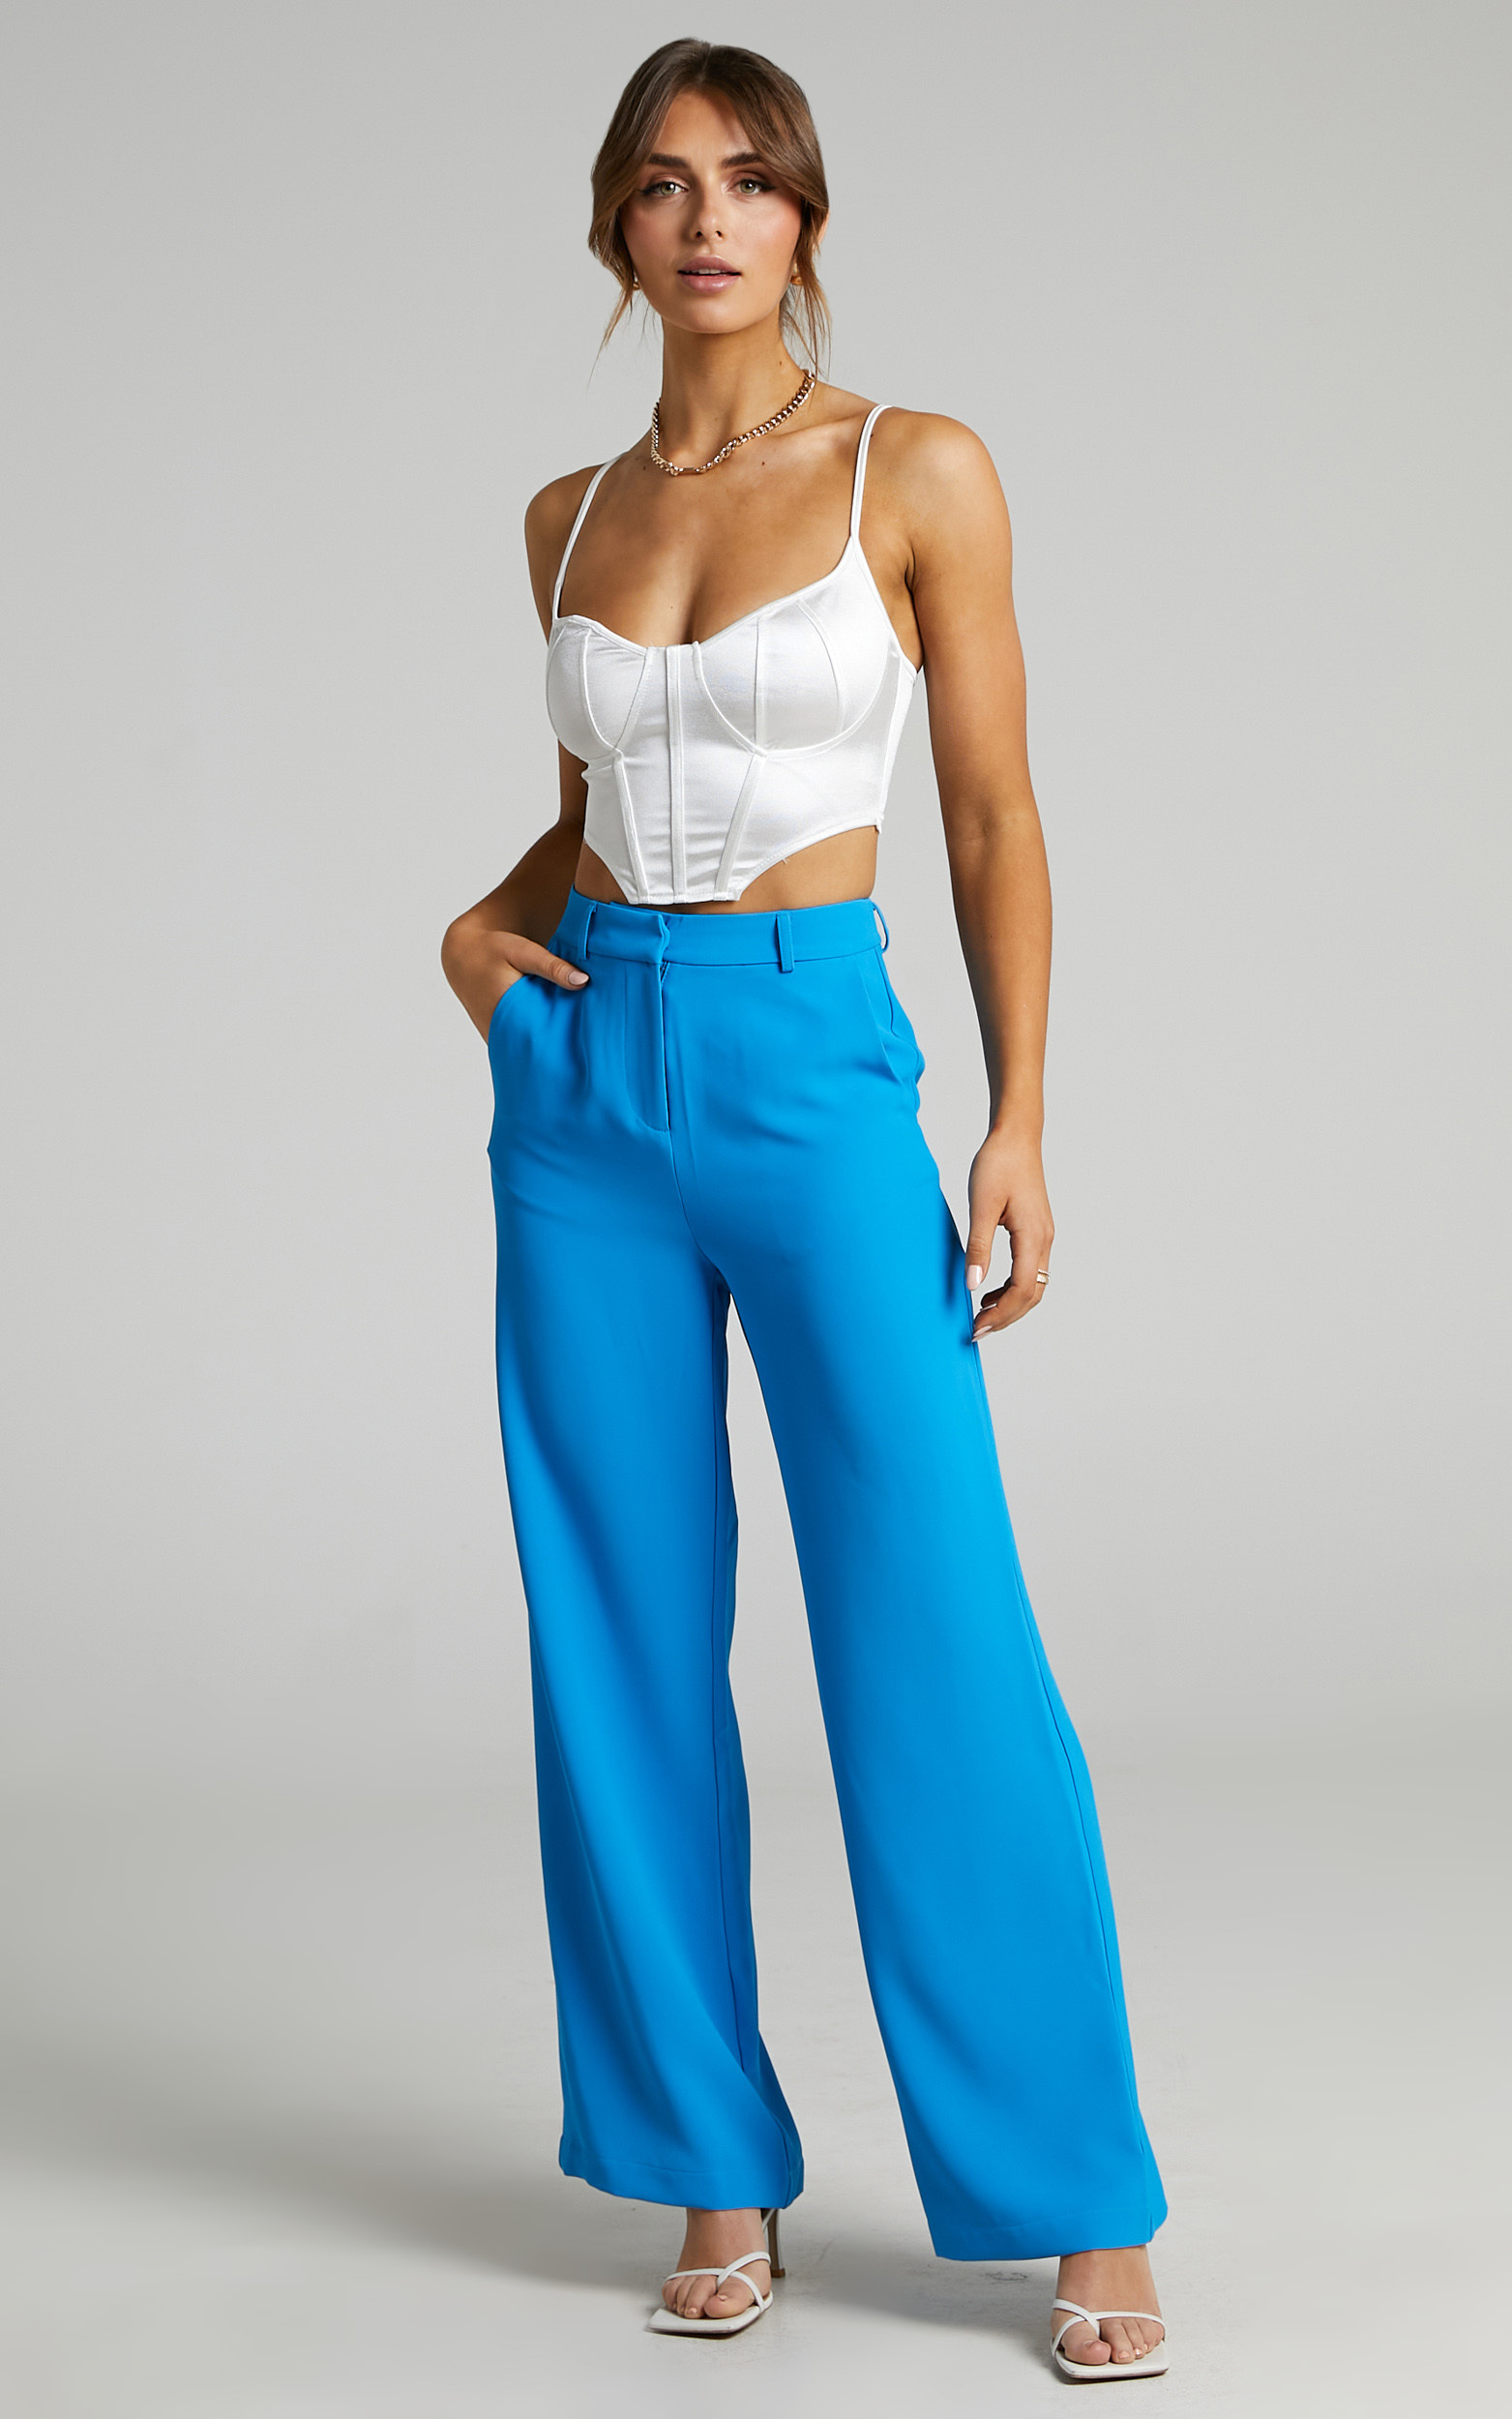 Bonnie Tailored Wide Leg Pants in Blue - 06, BLU1, hi-res image number null